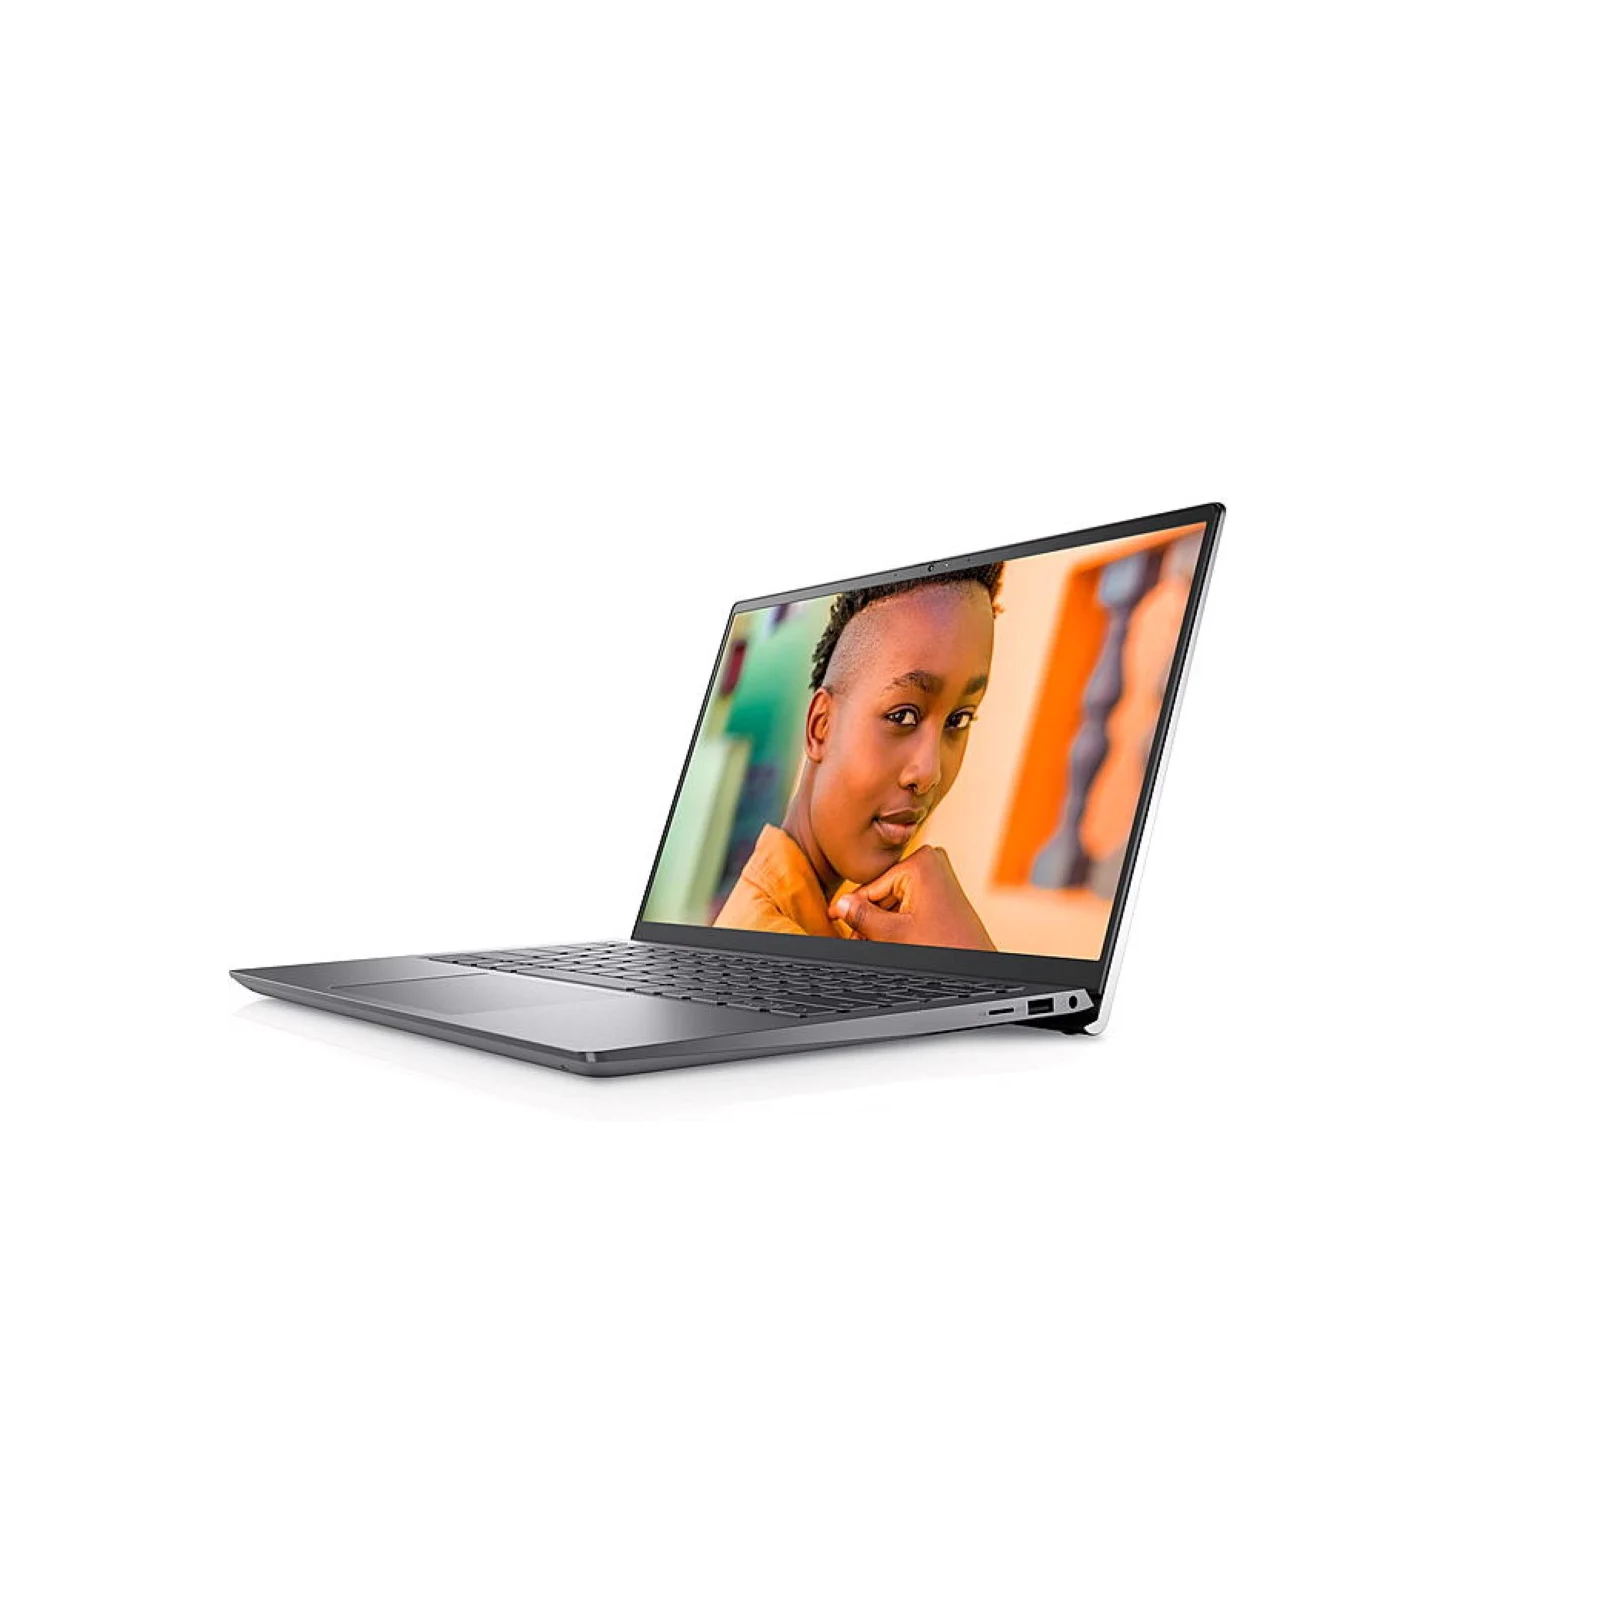 Dell Inspiron 14 5415 – Synnex FPT